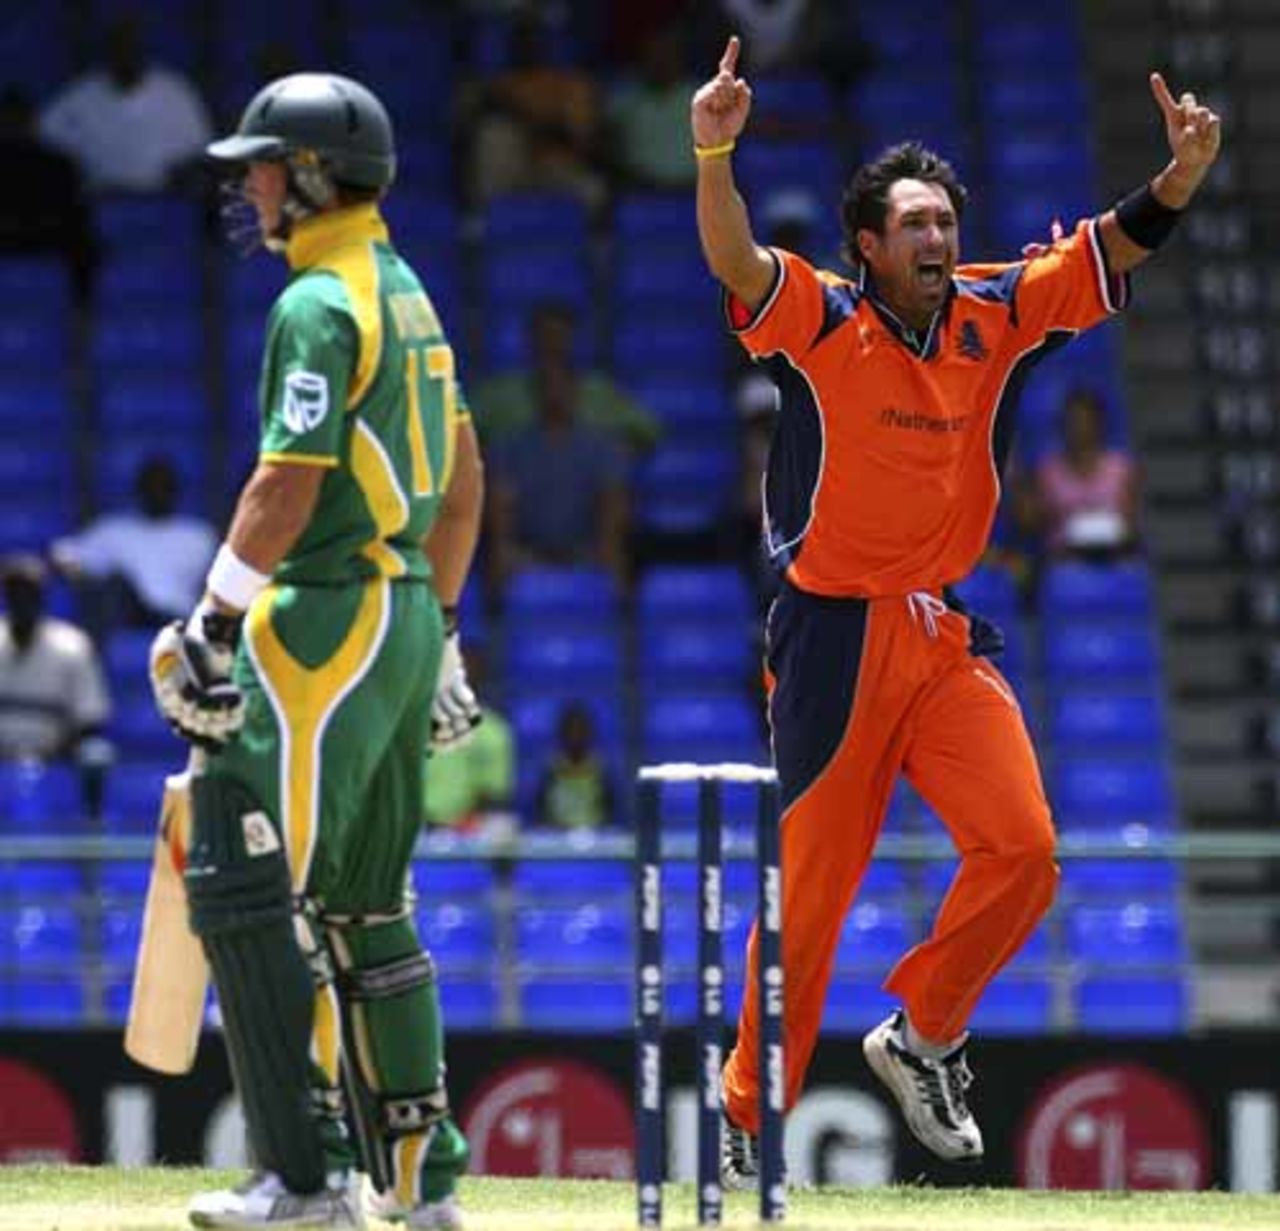 Billy Stelling celebrates the wicket of AB de Villiers, Netherlands v South Africa, Group A, Bassetere, March 16, 2007